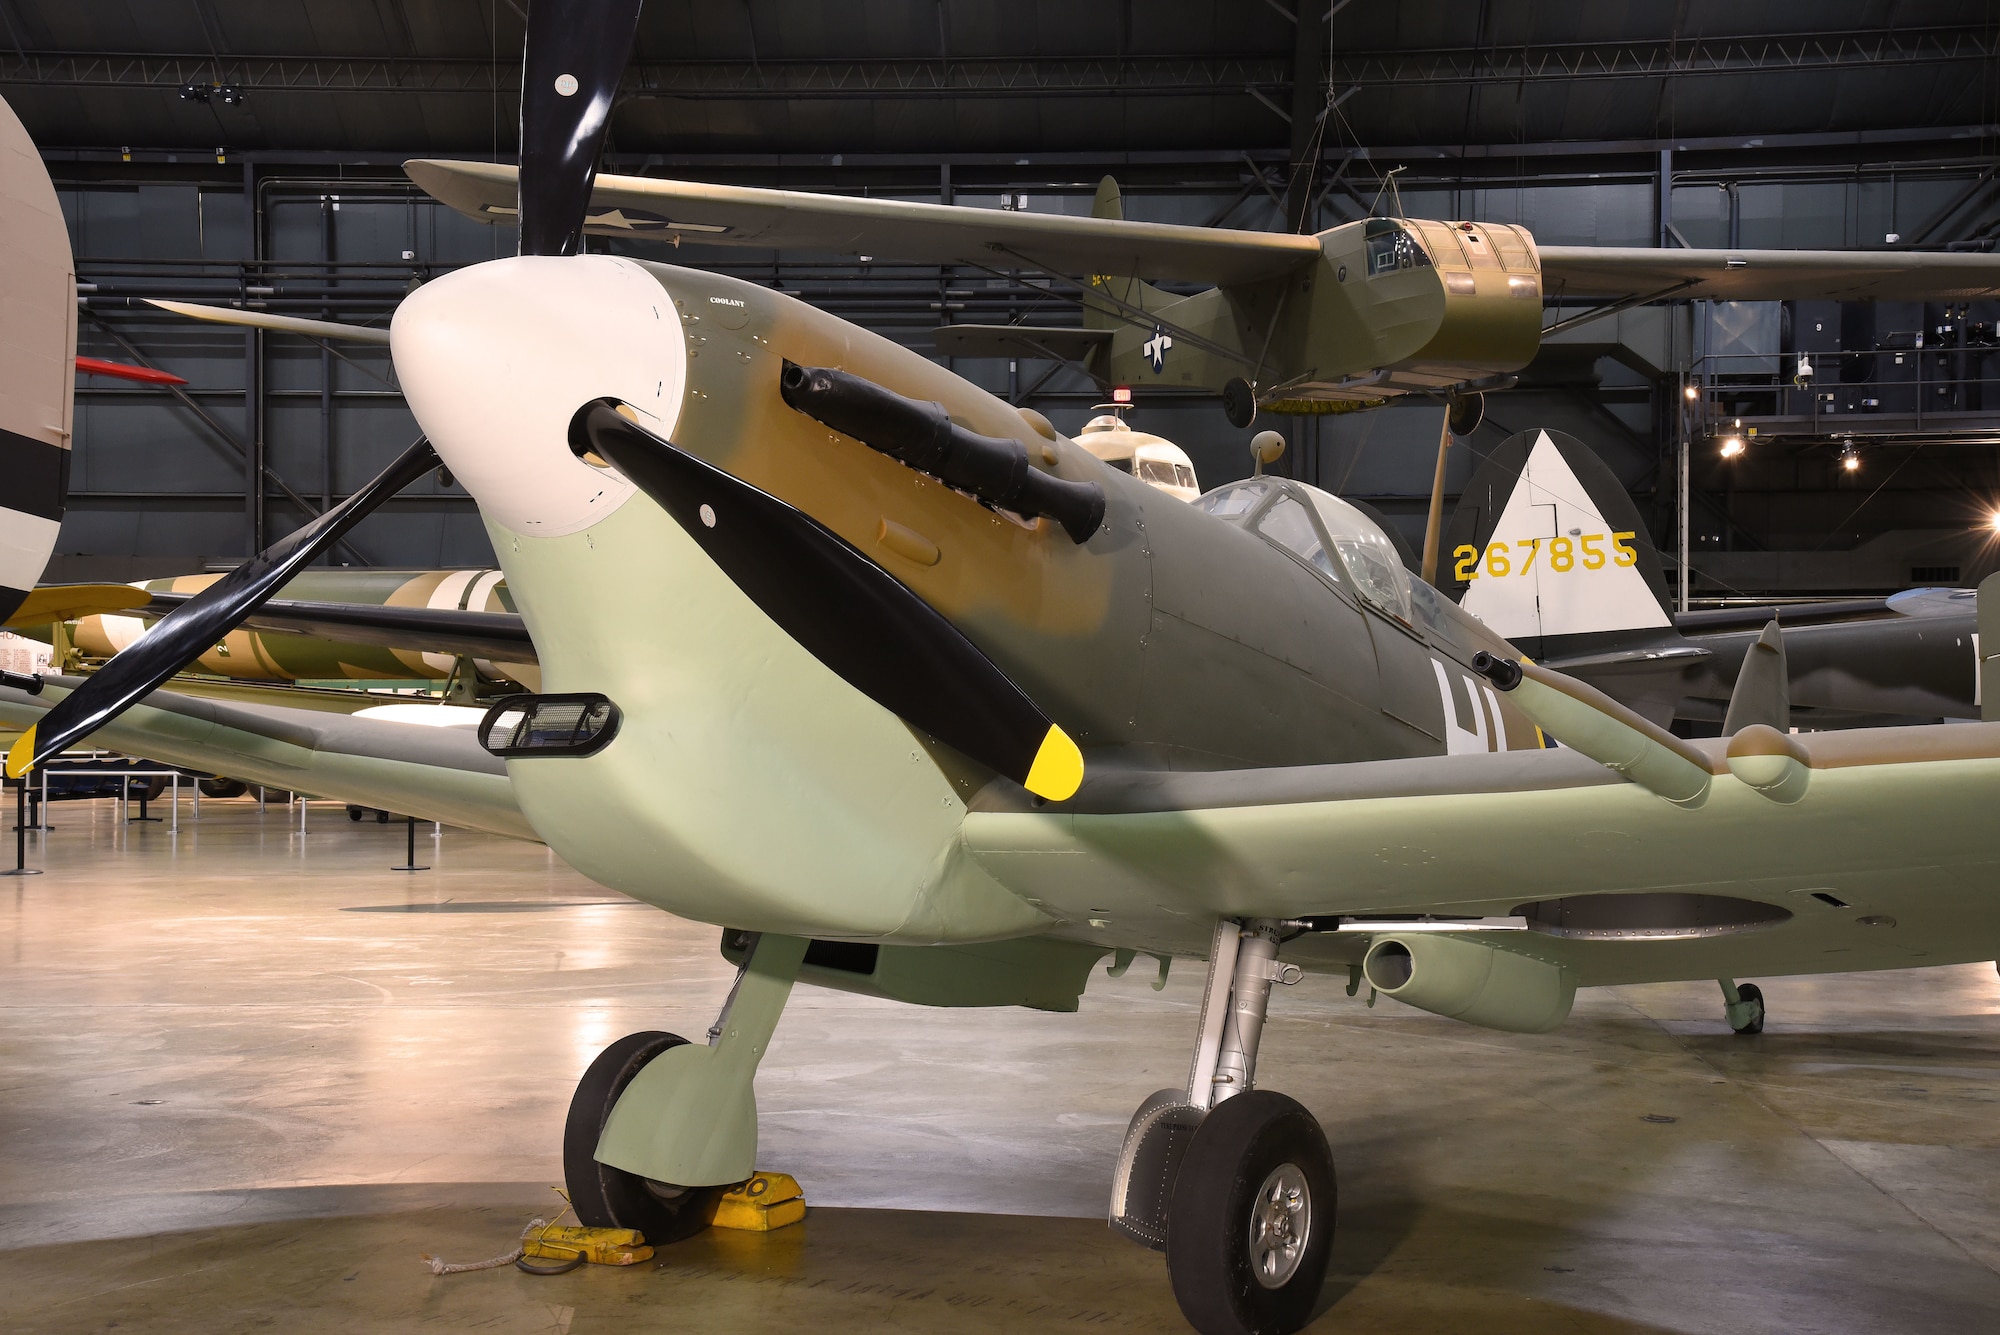 DAYTON, Ohio -- Supermarine Spitfire Mk.Vc in the World War II Gallery at the National Museum of the United States Air Force. (U.S. Air Force photo by Ken LaRock)